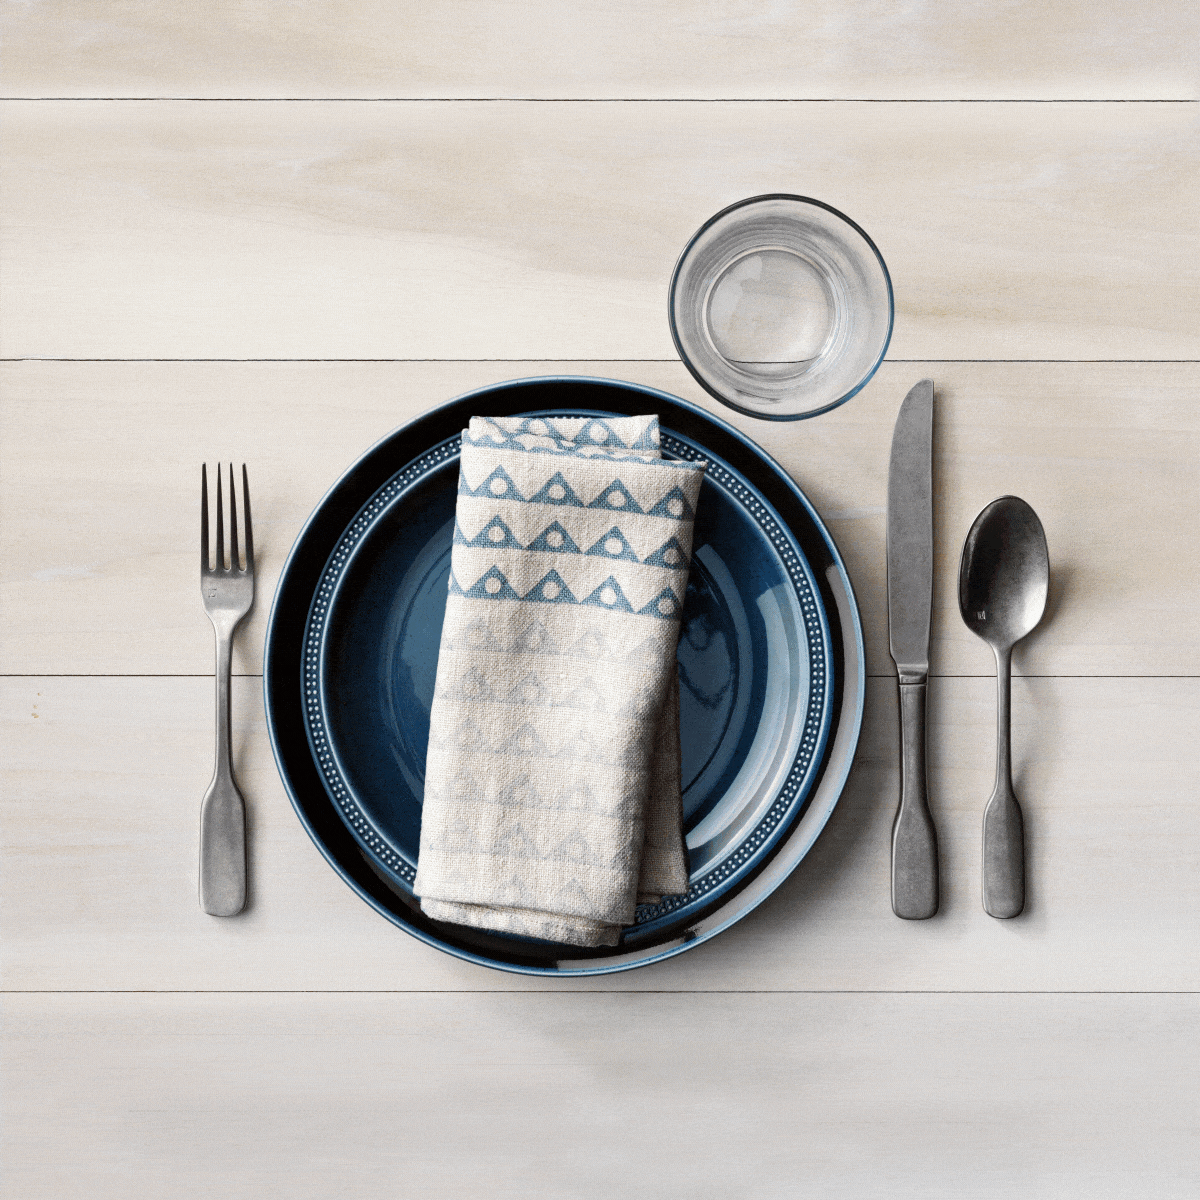 https://www.tasteofhome.com/wp-content/uploads/2018/06/TOH-table-settings-SQ.gif